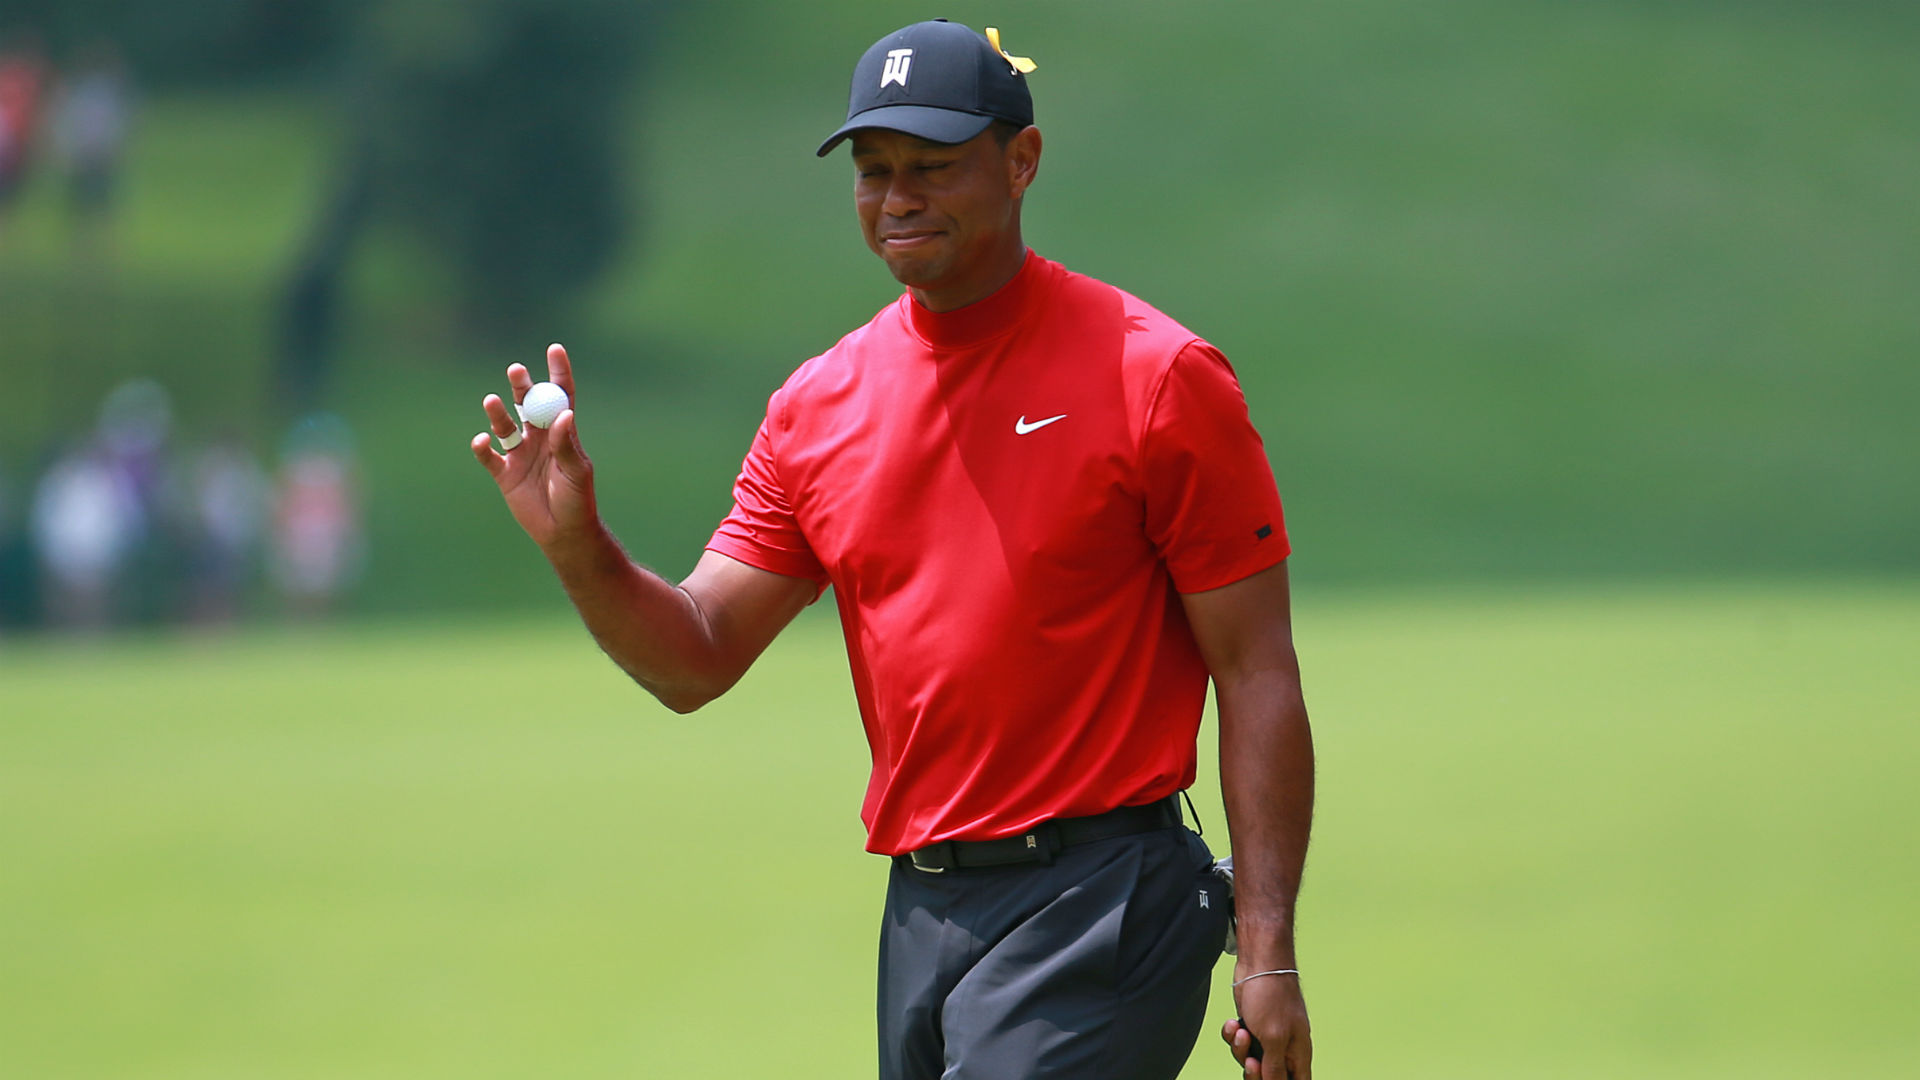 Kevin Durant's injury was the subject of a question during Tiger Woods' press conference ahead of the U.S. Open at Pebble Beach.